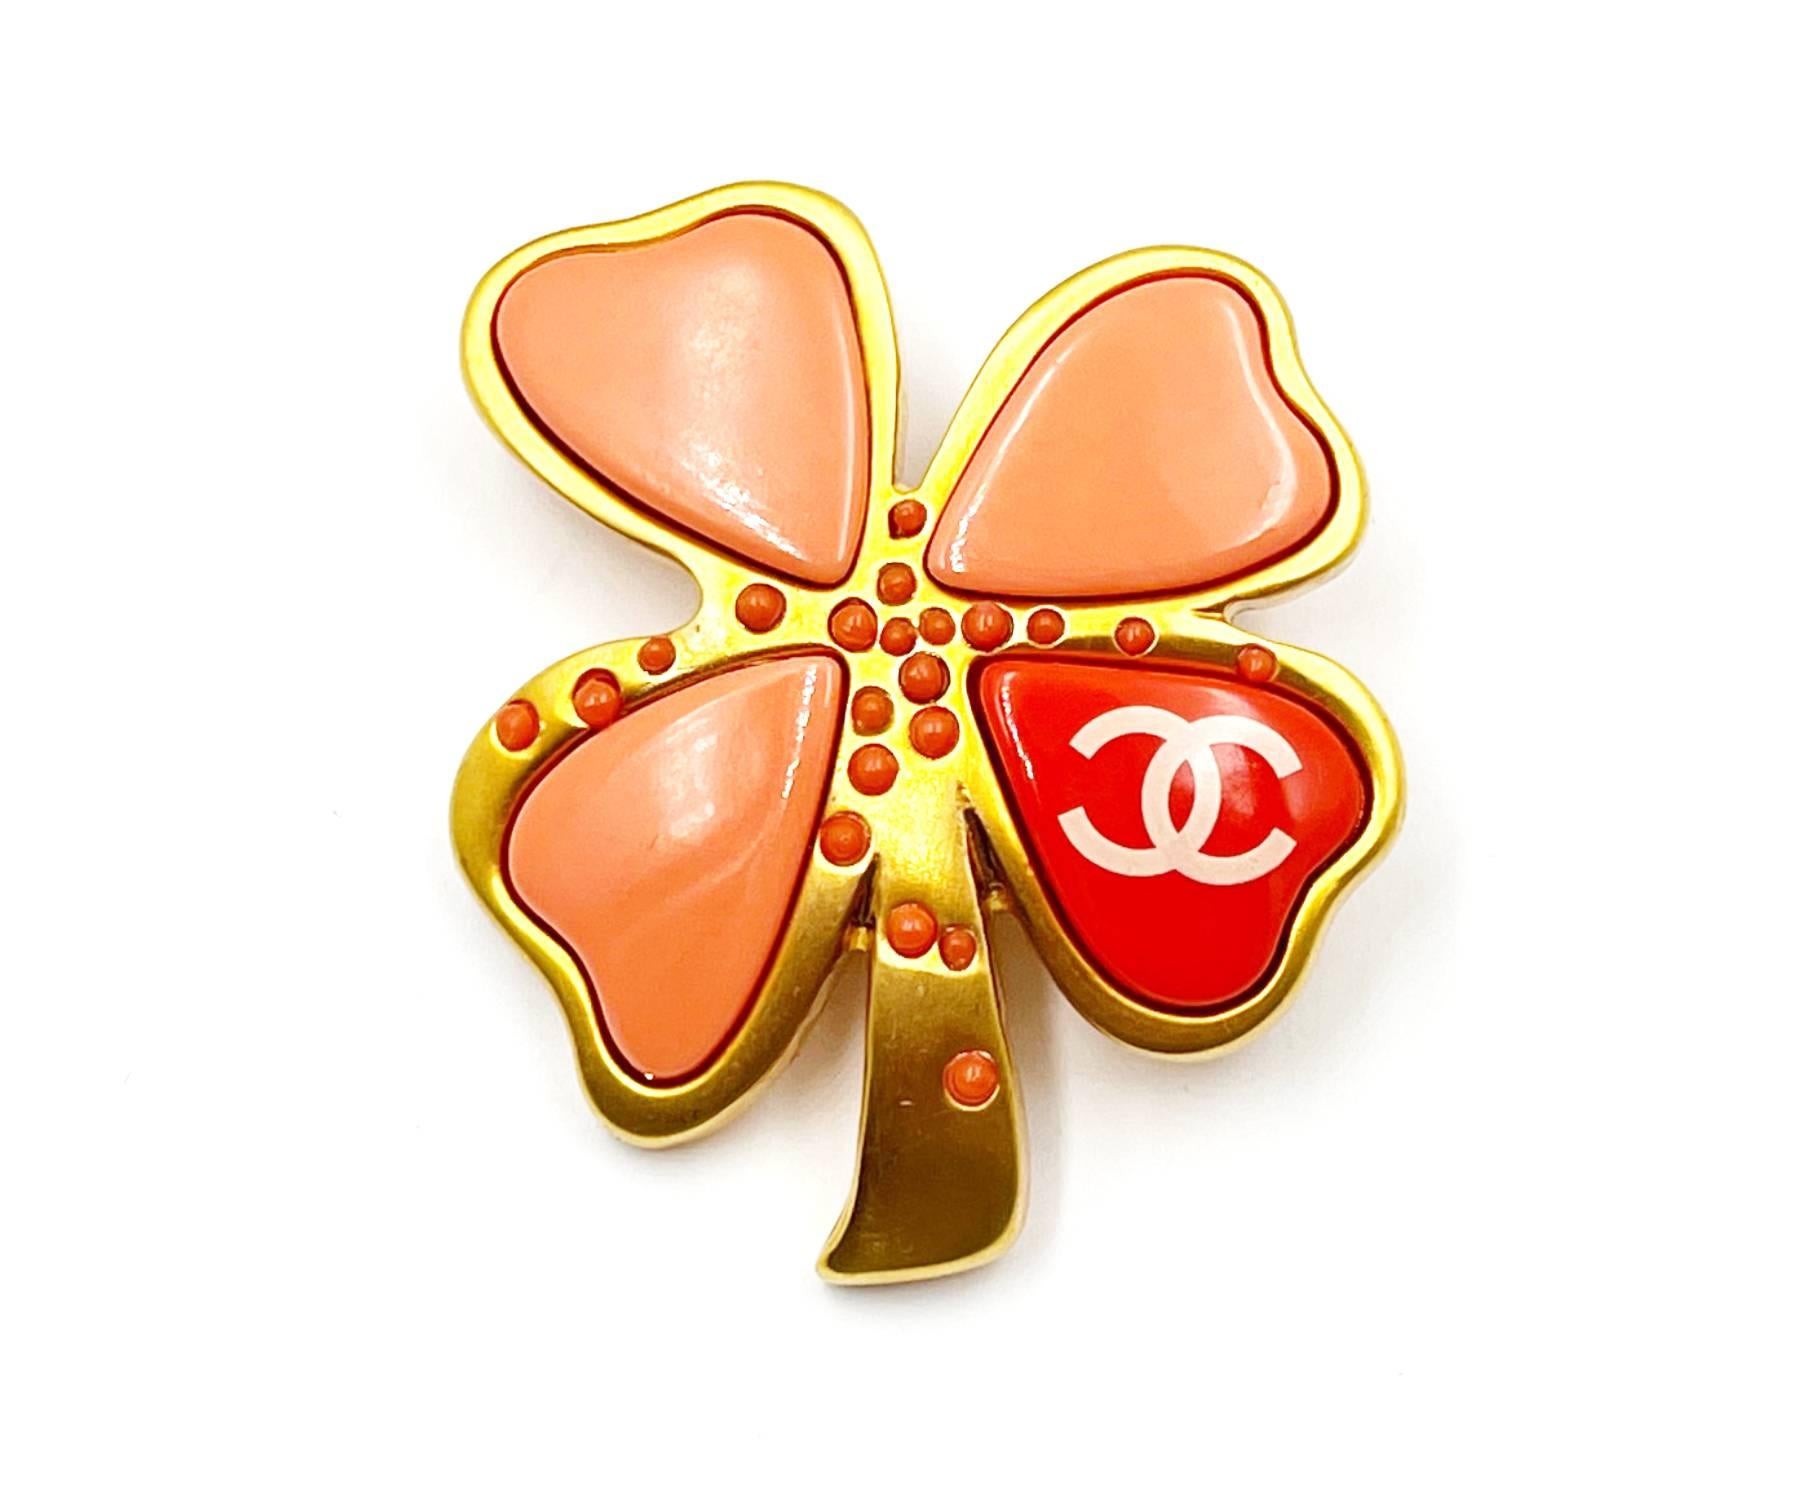 Chanel Rare Gold CC Coral Clover Brooch

*Marked 03
*Made in France
*Comes with original box

– Approximately 1.75″ x 2″
– Very cute
-In an excellent condition

AB2033-00187